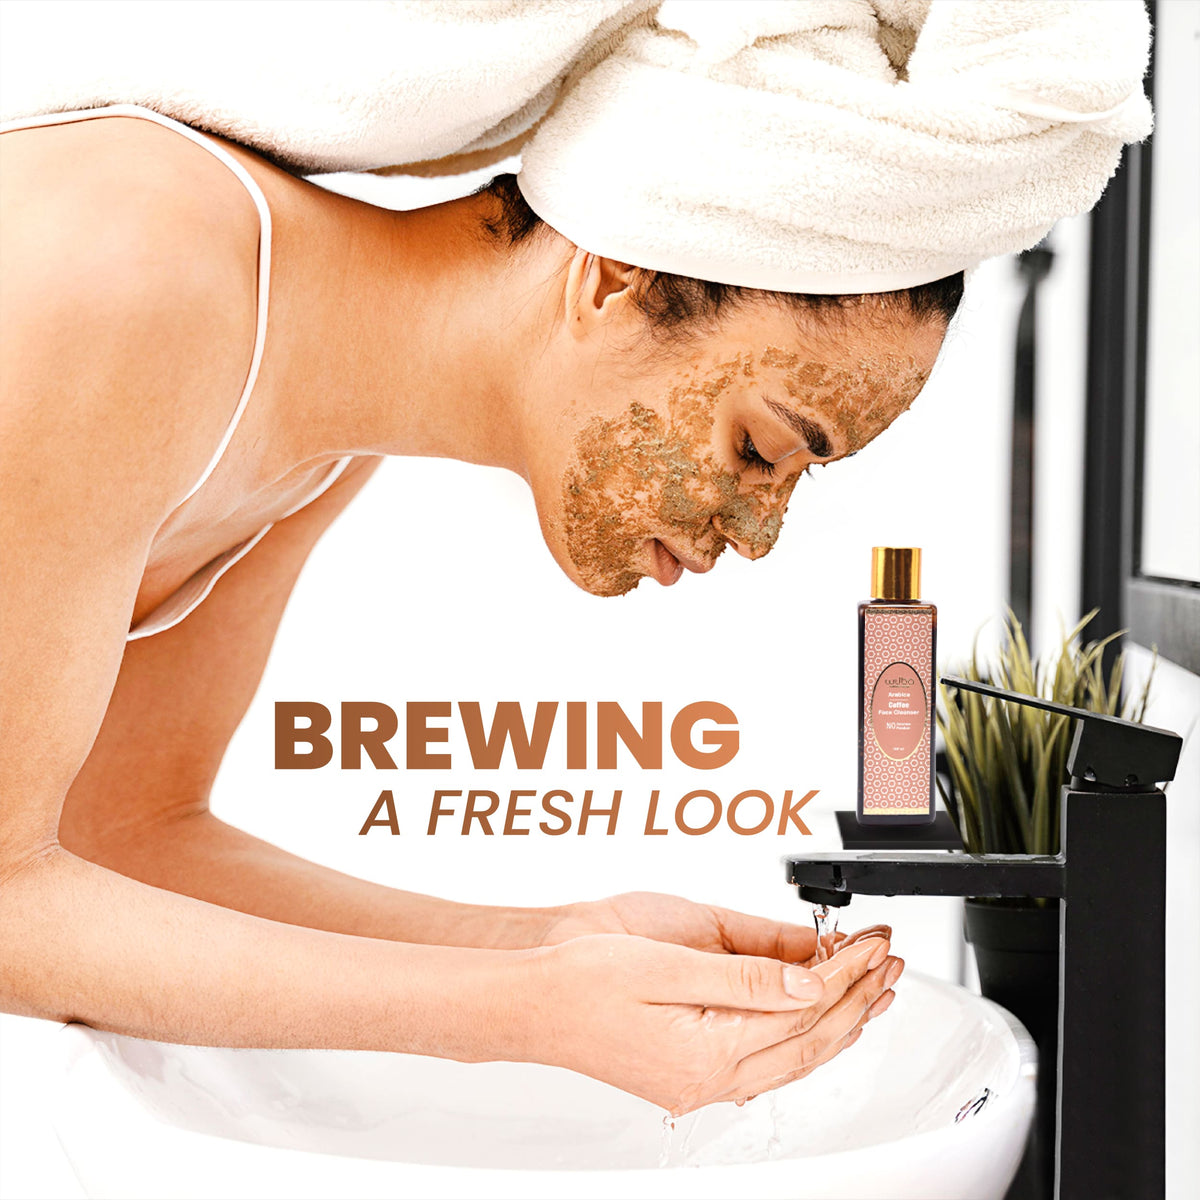 Coffee Face Wash to Remove Tan, Dead Skin and Deep clean - 100ml